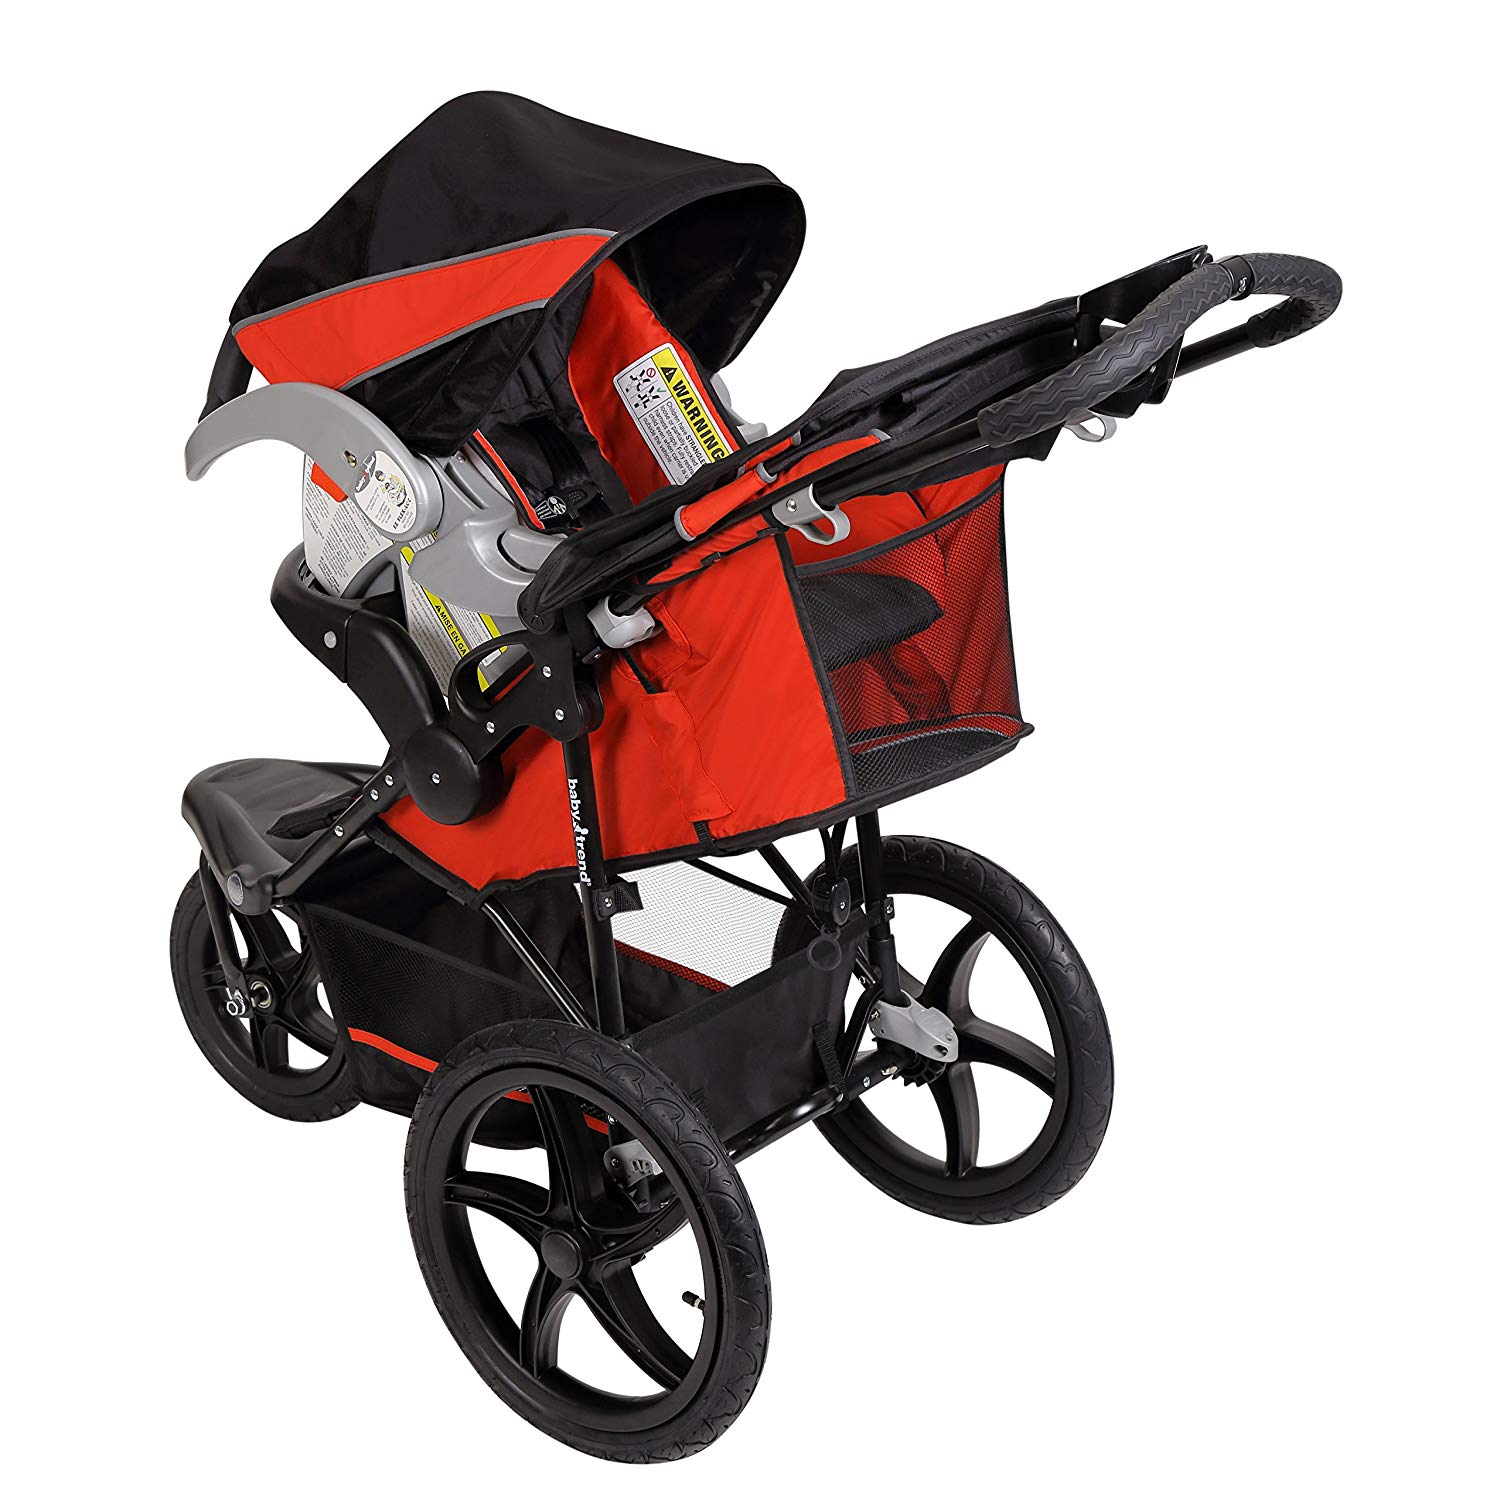 Baby Trend XCEL Infant/Child All Terrain Fitness Travel Jogger Stroller, Picante - image 4 of 6